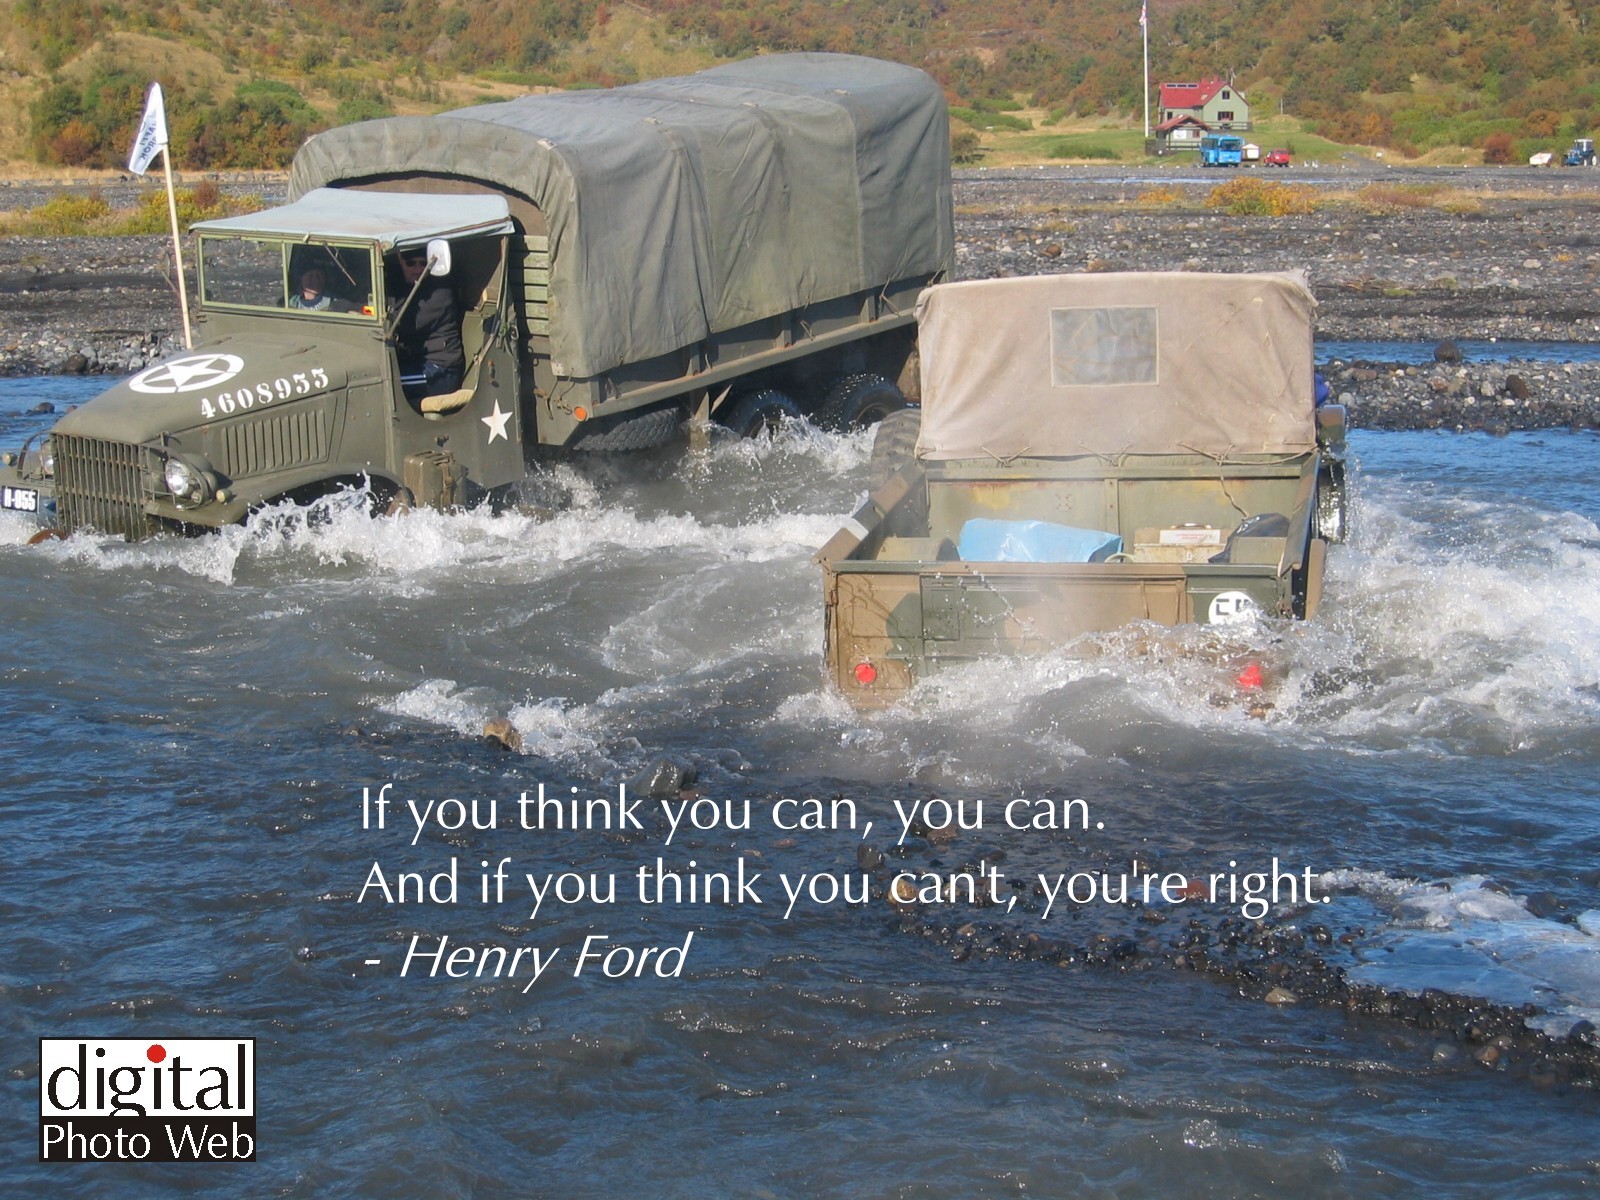 And if you think you can't you're right. -Henry Ford